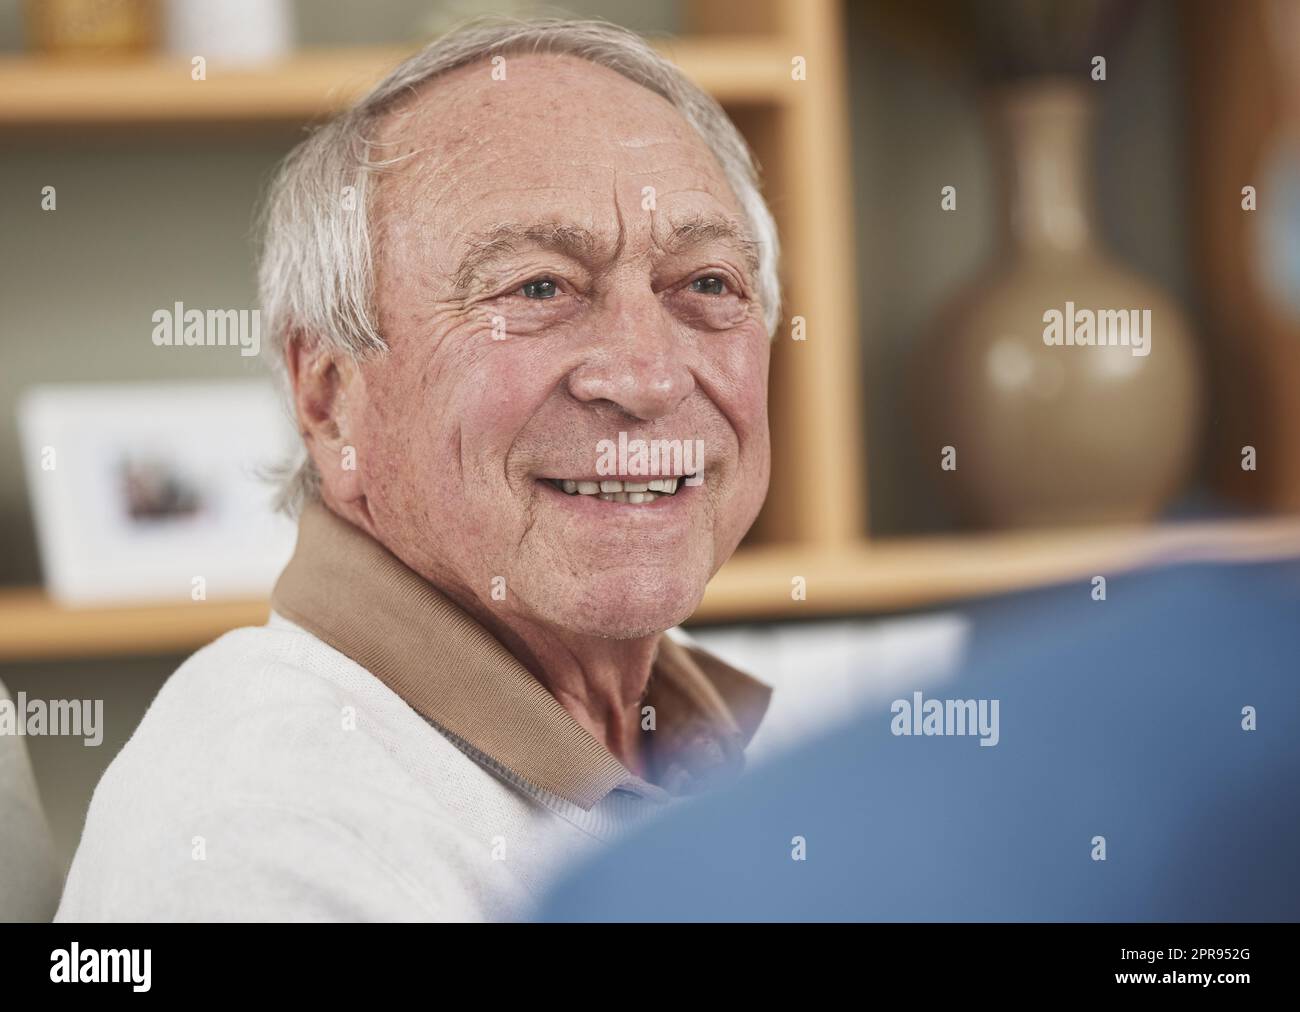 Hes happy to be getting some medical care. an elderly man having a checkup with an unrecognizable nurse at home. Stock Photo